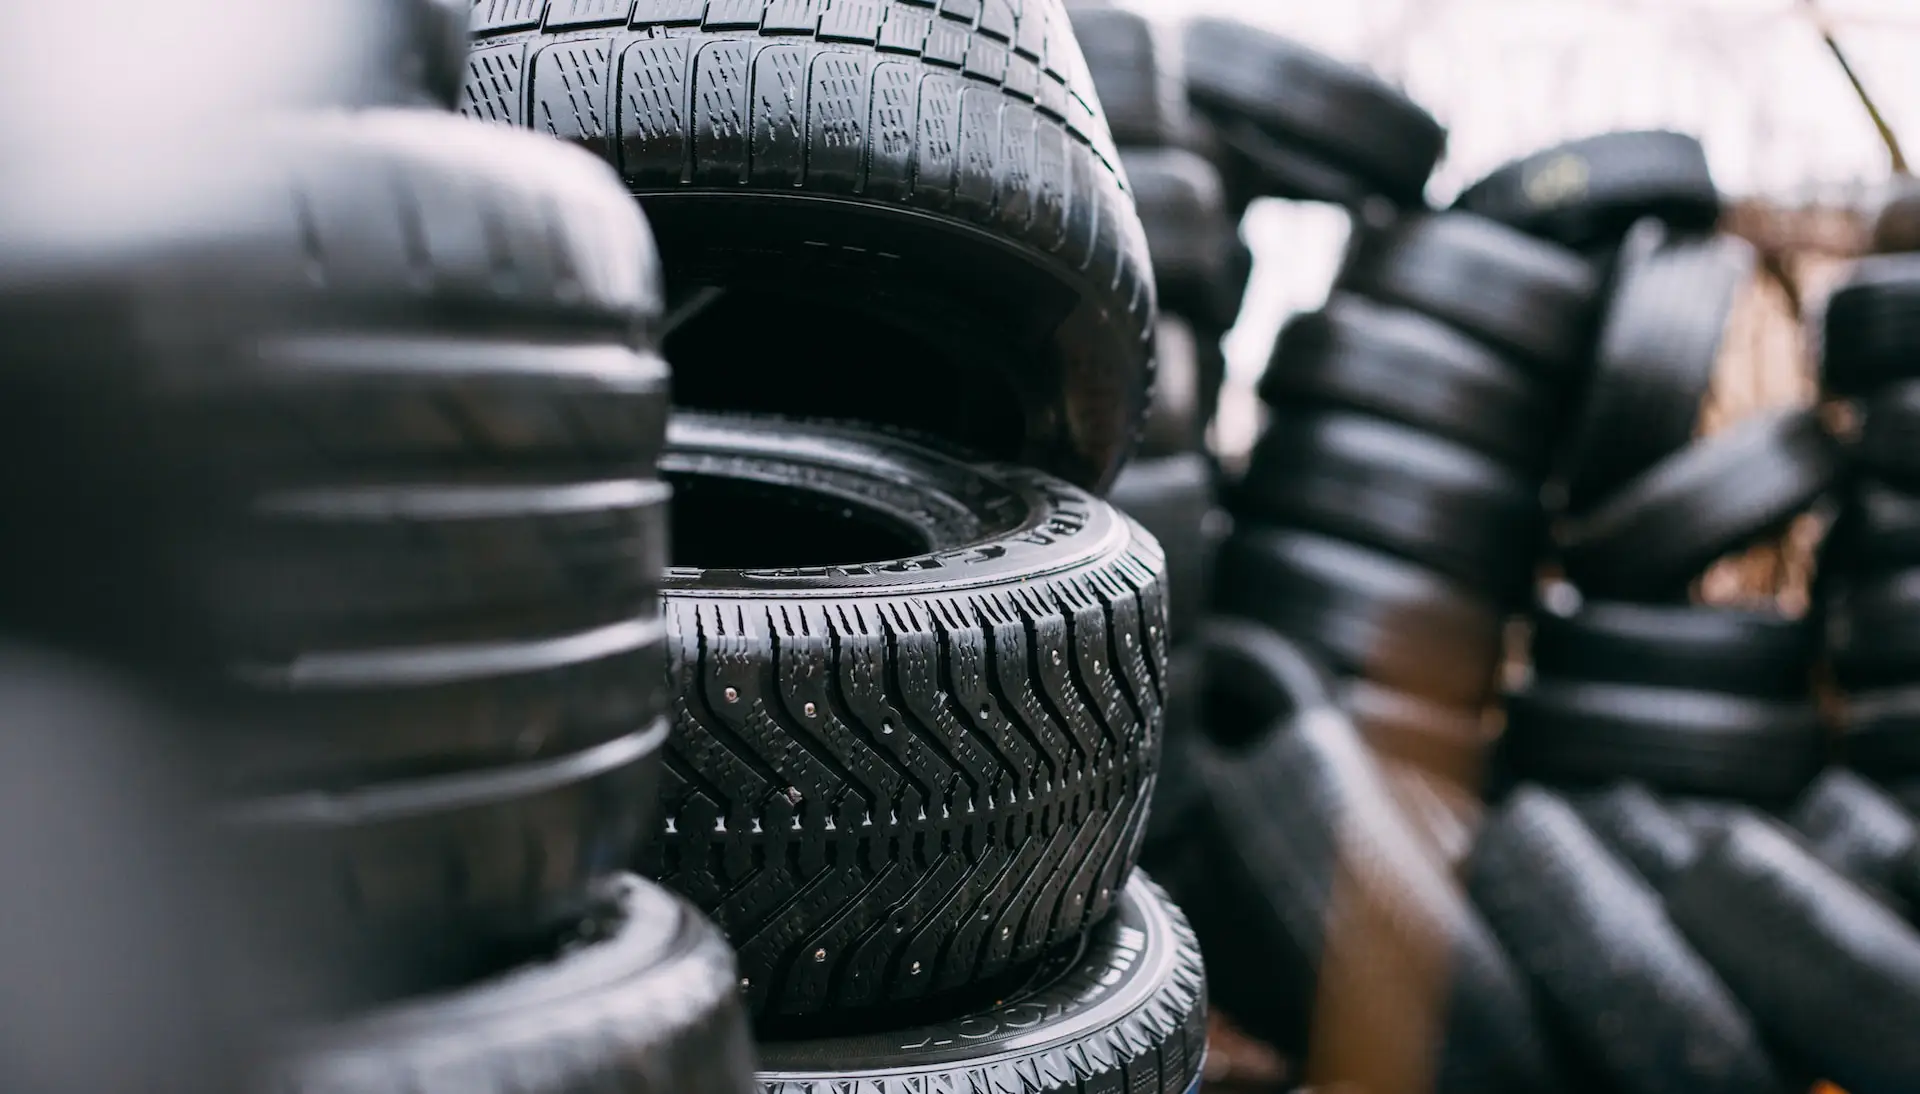 pile of car tyres in the foreground and background